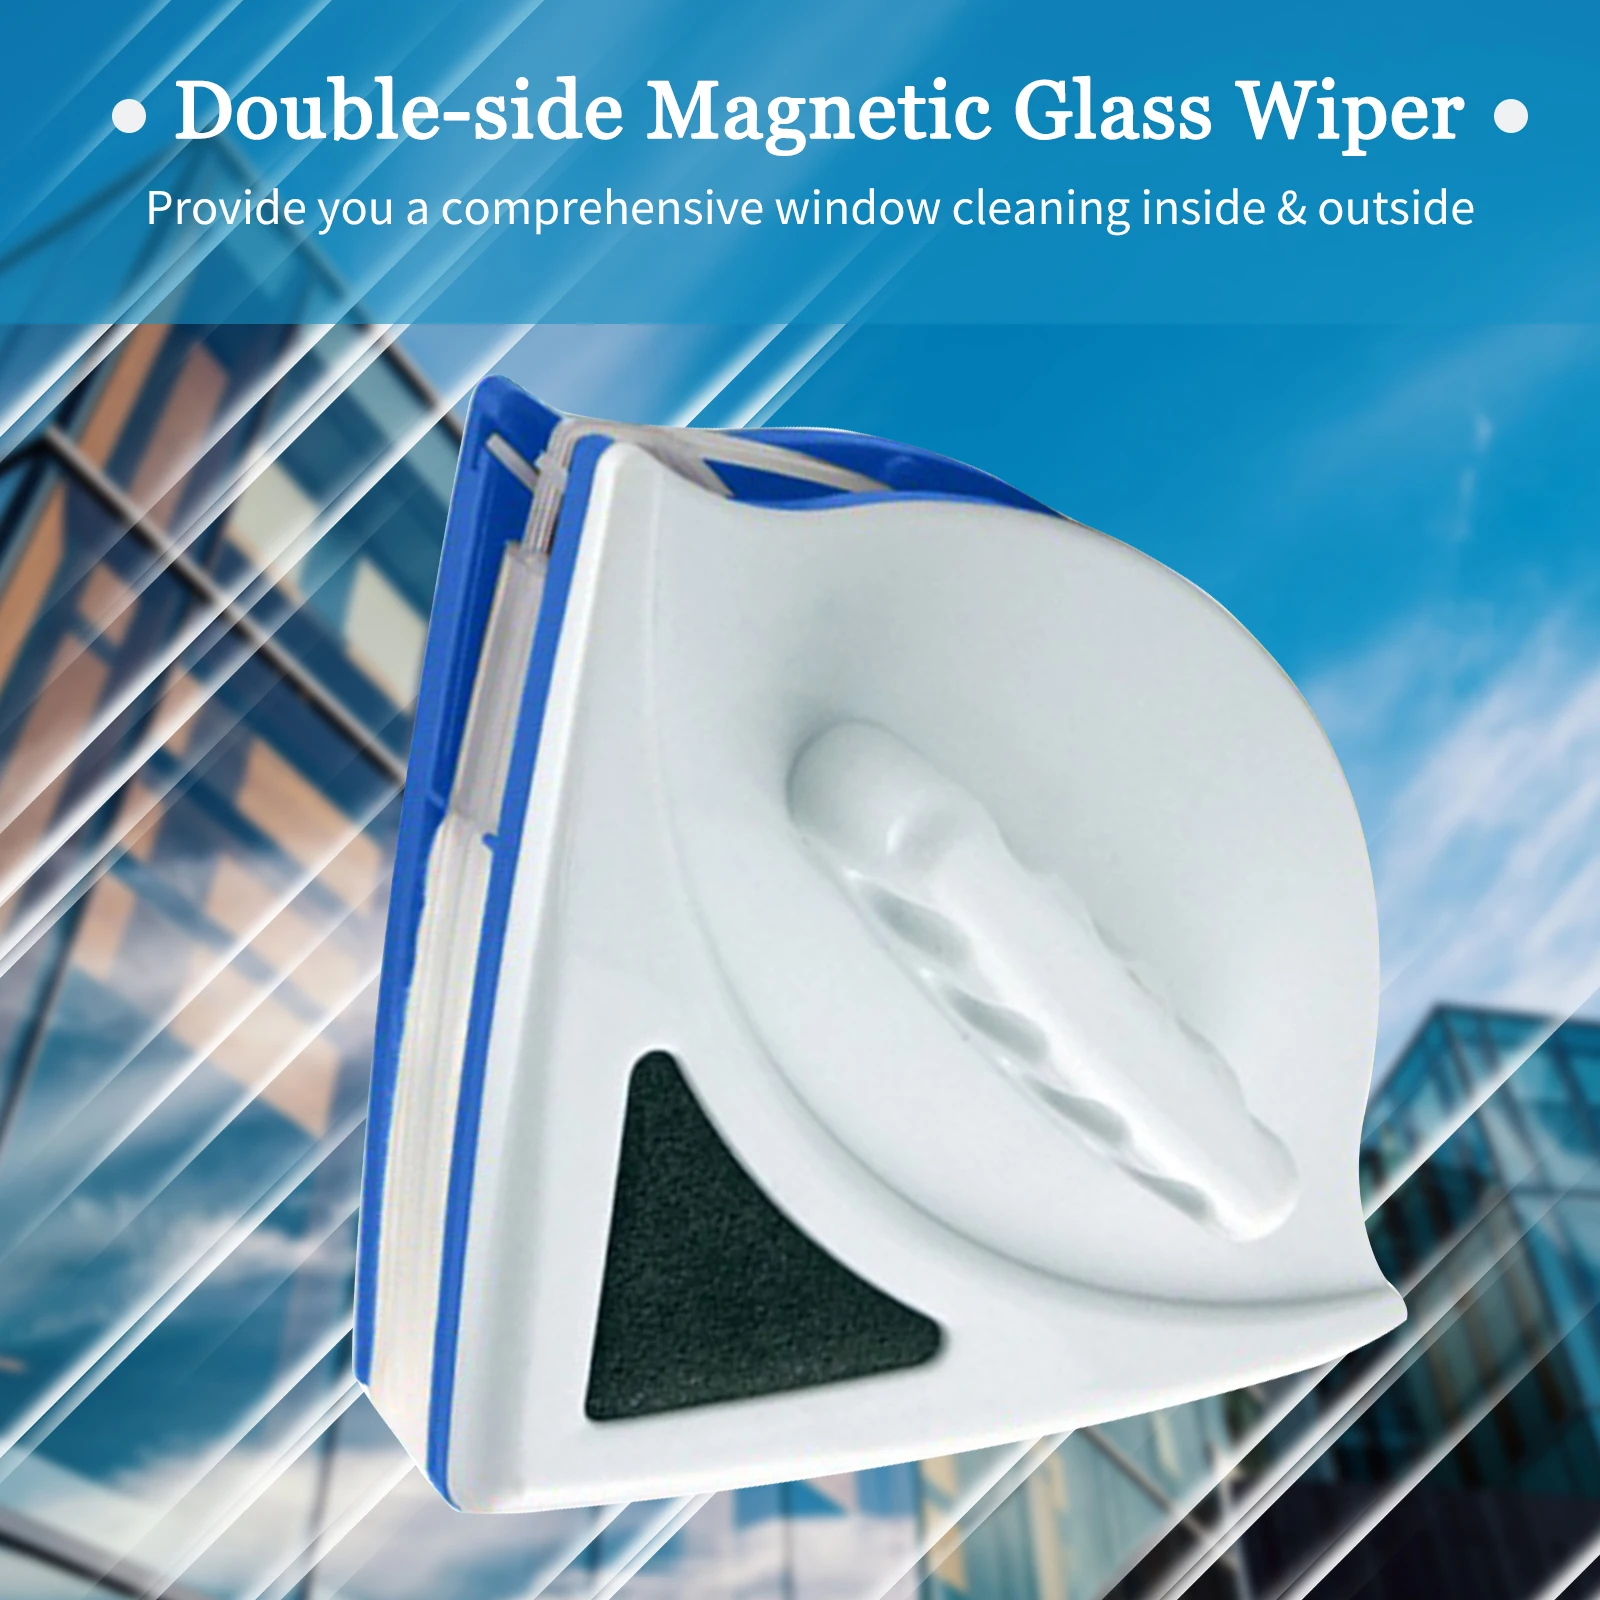 Double Sided Magnetic Window Glass Cleaner Magnets Brush Home Wizard Wiper Surface Cleaning Tools Thickness 3-8mm